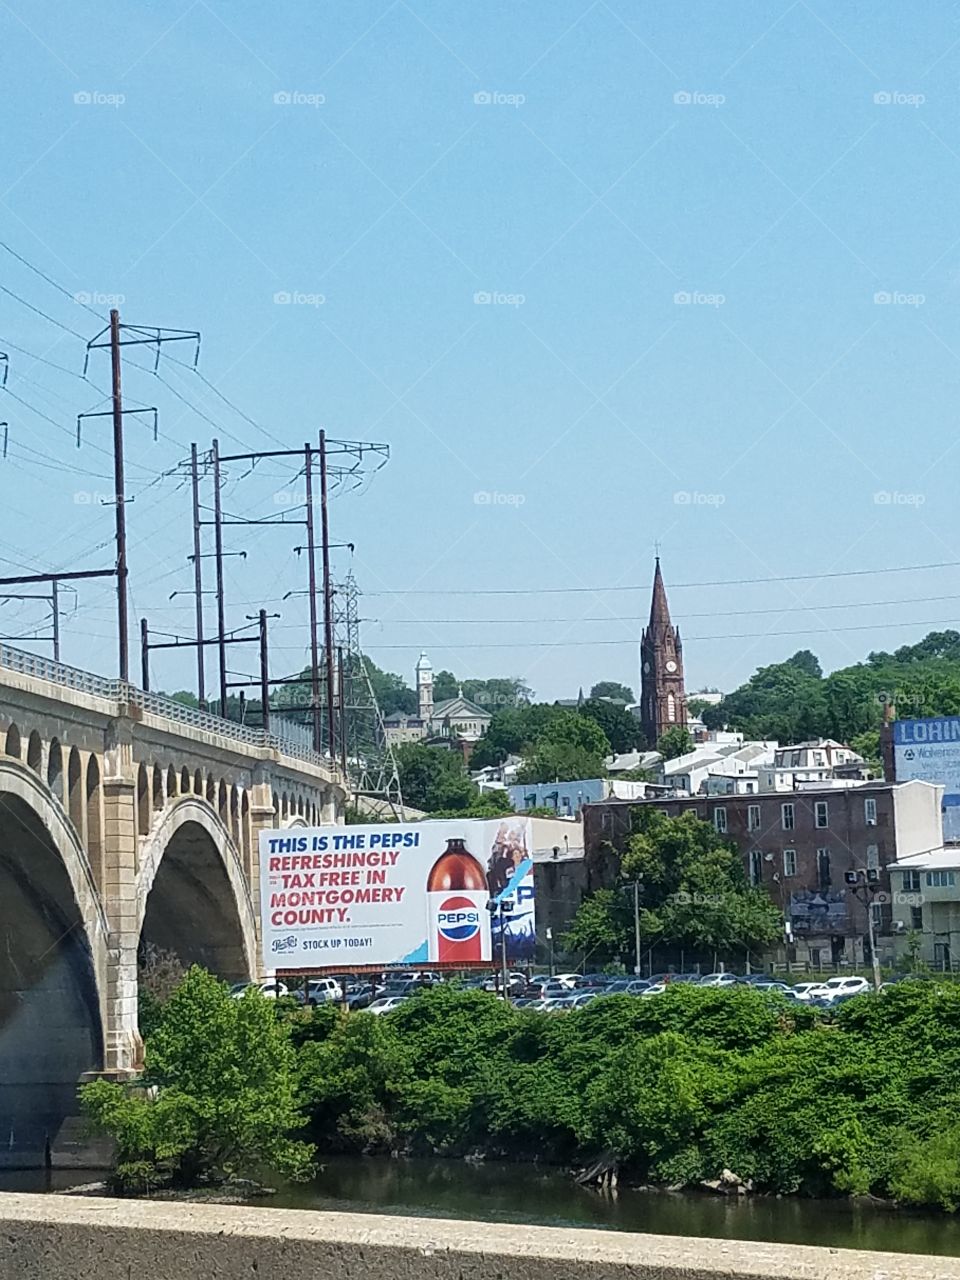 View of Manayunk PA from Schuylkill Rd.